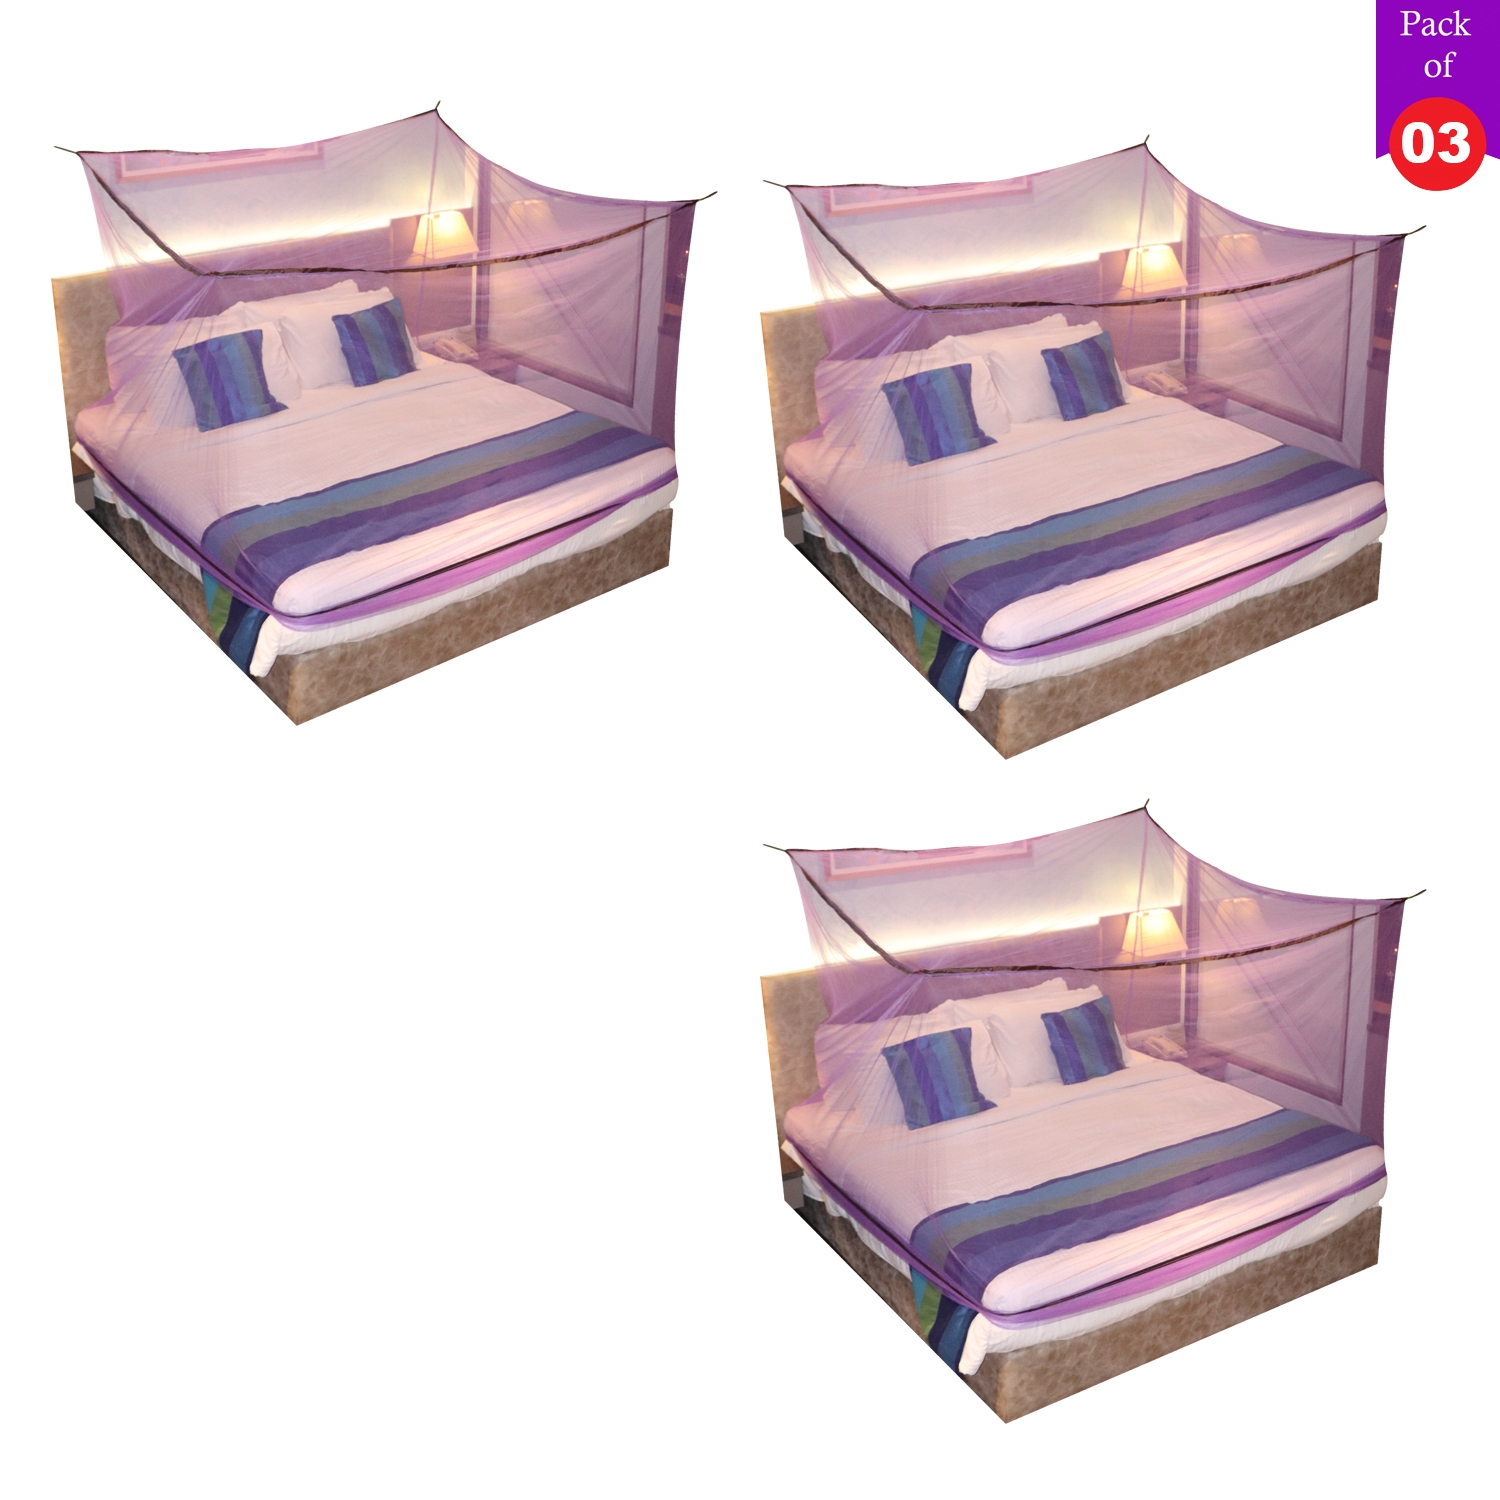 SILVER SHINE | Mosquito Net for Double Bed, King-Size, Square Hanging Foldable Polyester Net Purple And Brown Pack of 3 2